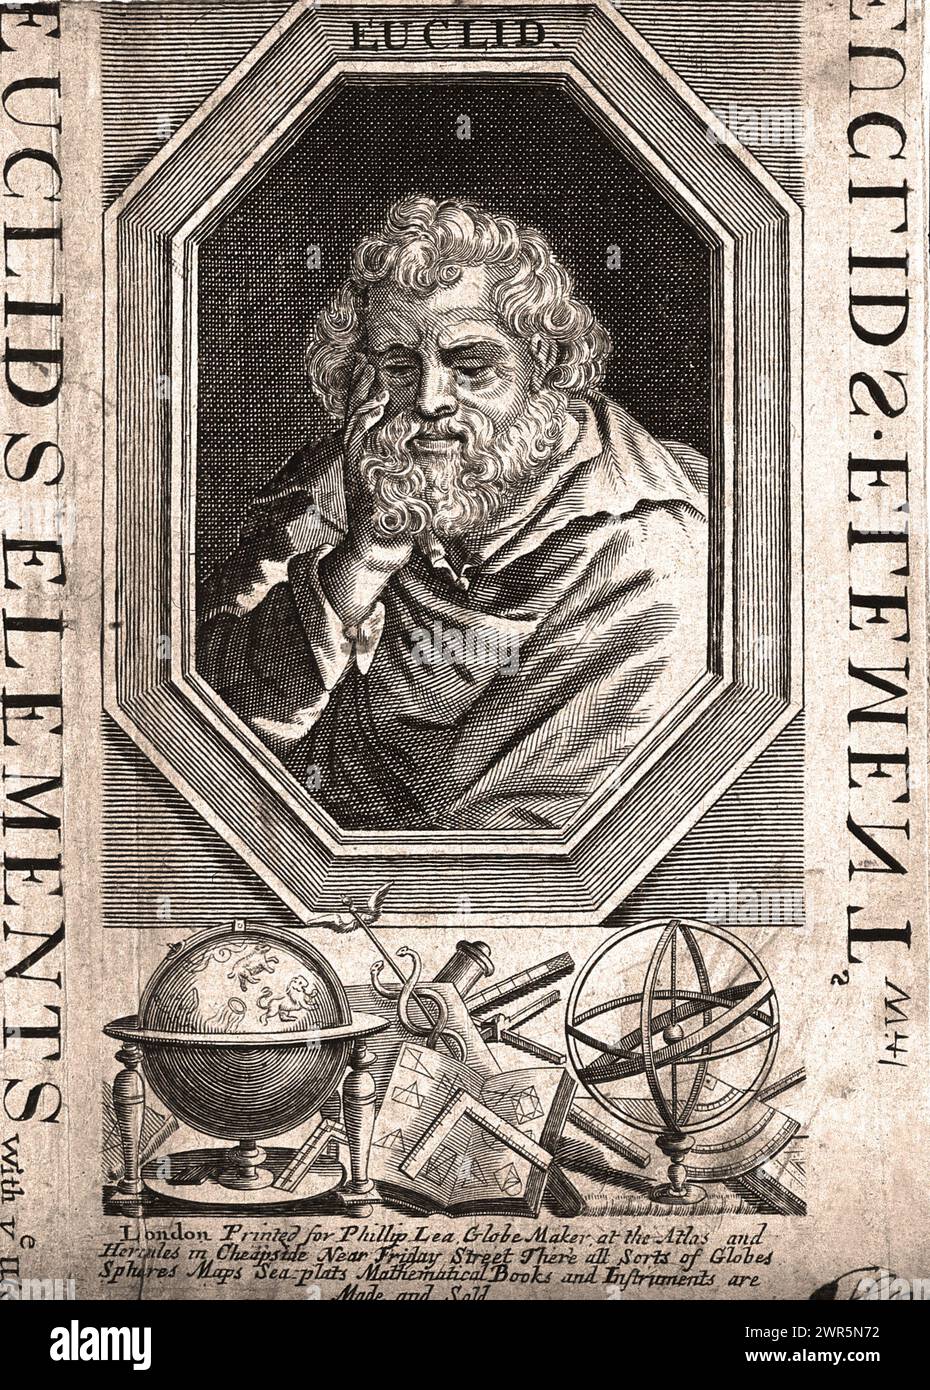 Euclid, c300 BC, was an ancient Greek mathematician, engraving by Philip Lea c1700 Stock Photo